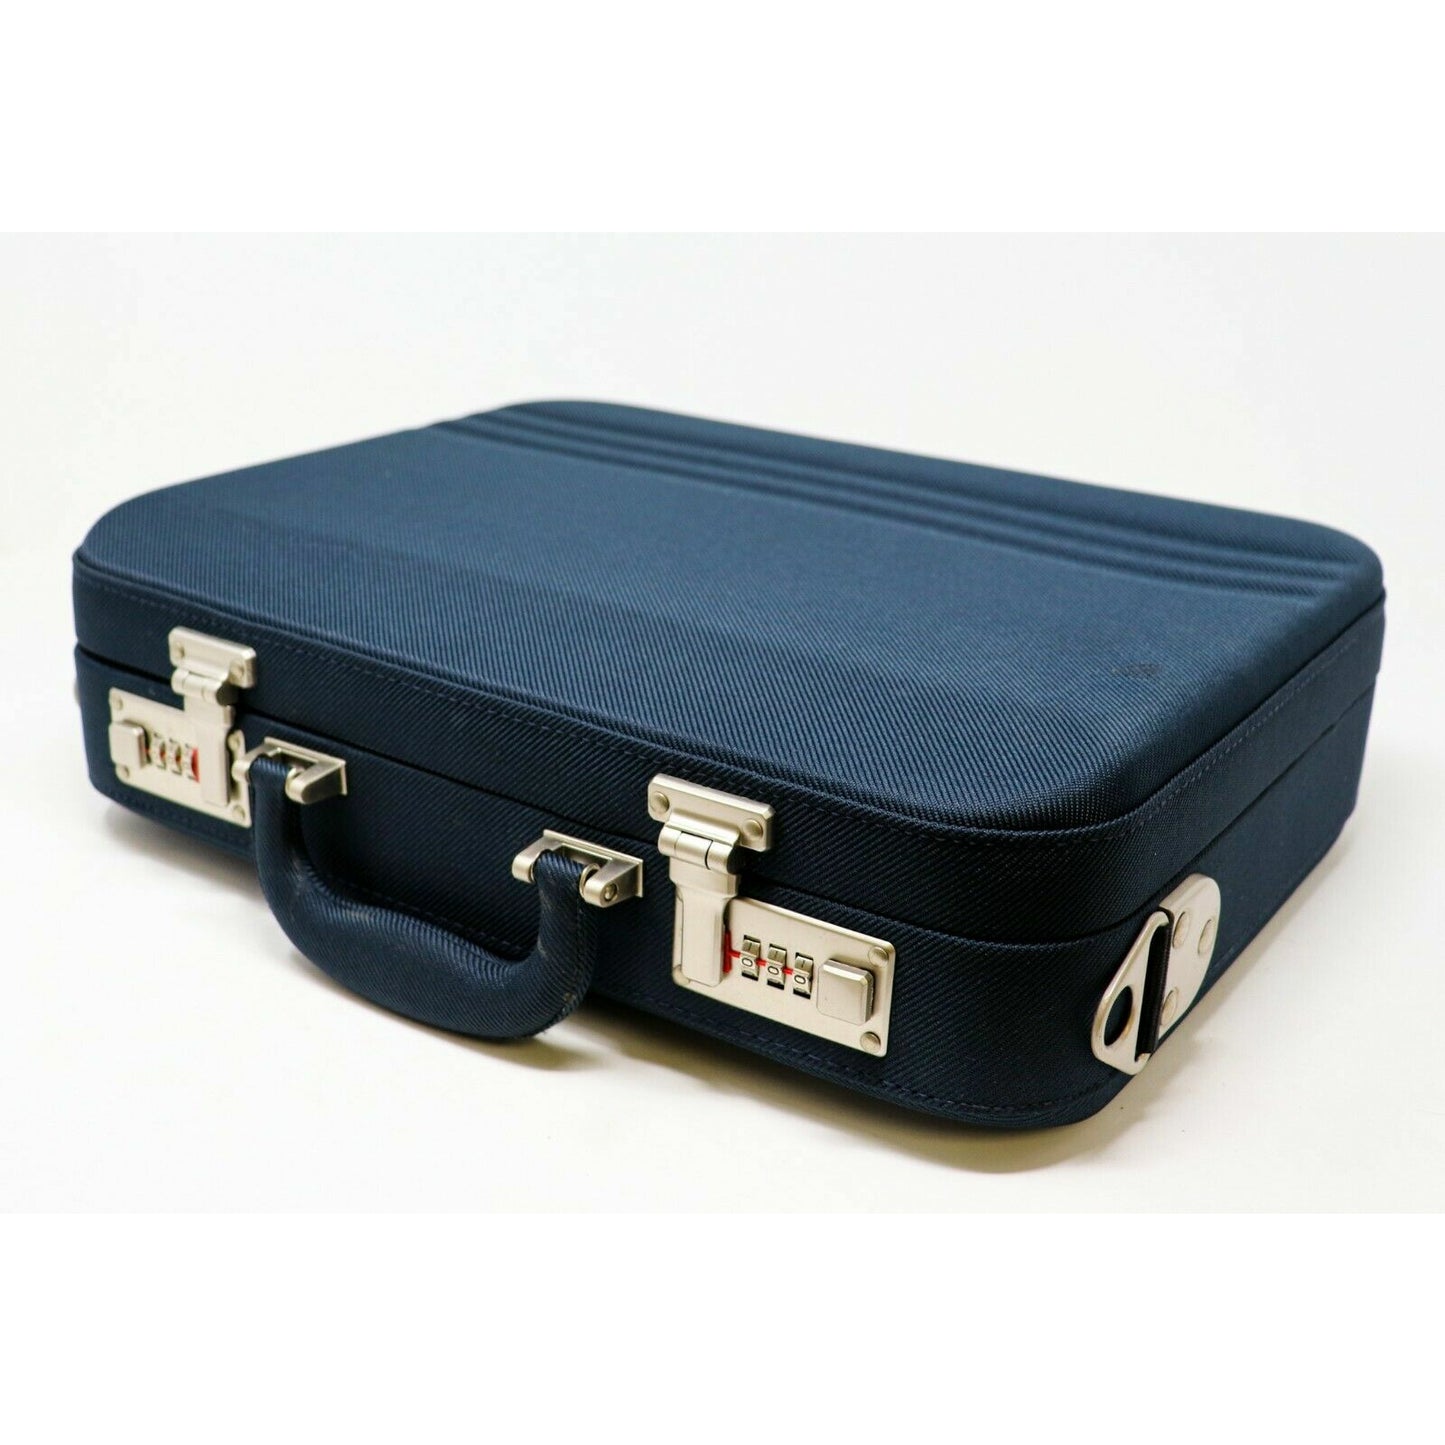 4 Microphone Carrying Case Mic Instrument Storage Portable Flight Box Blue Color